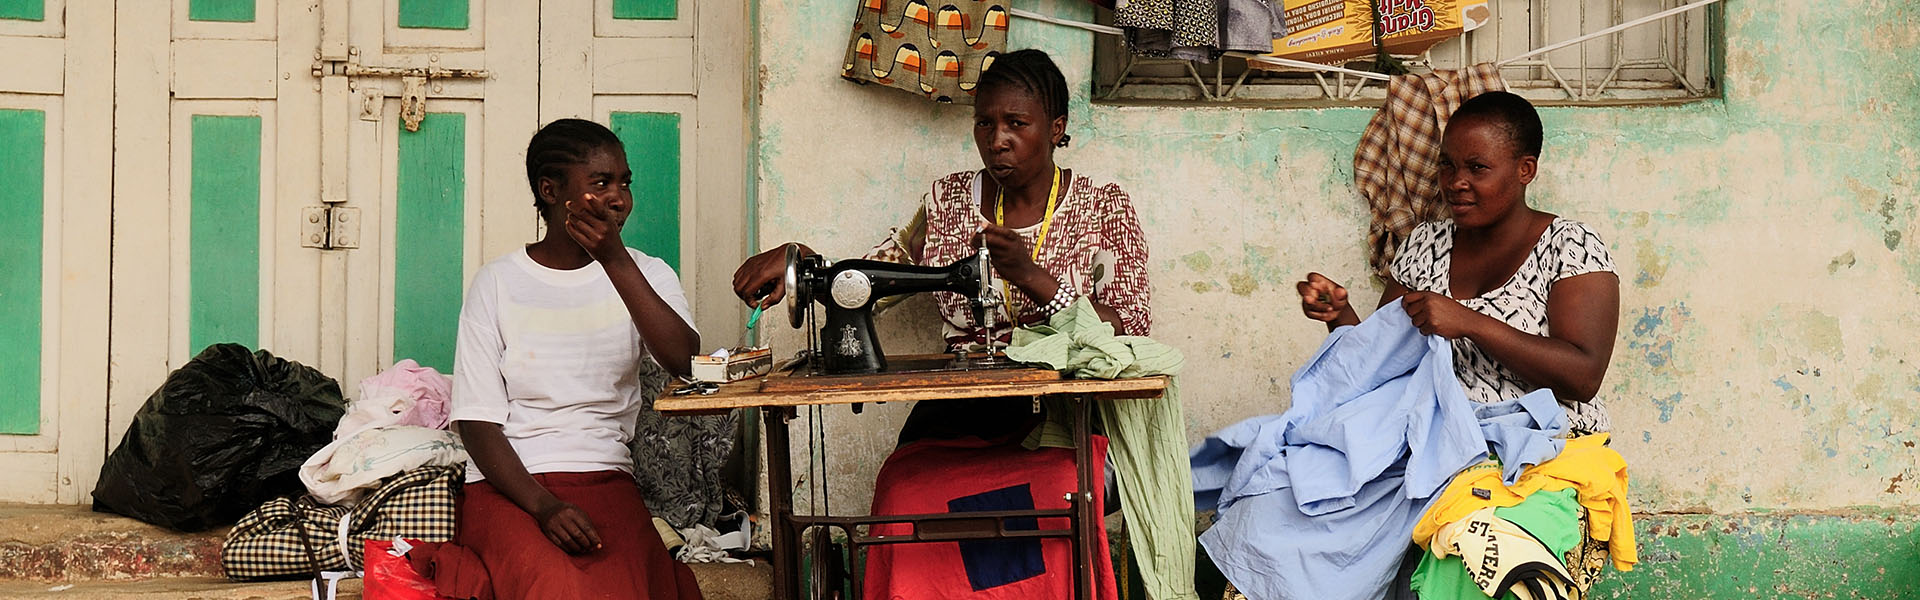 women working at a sewing machine